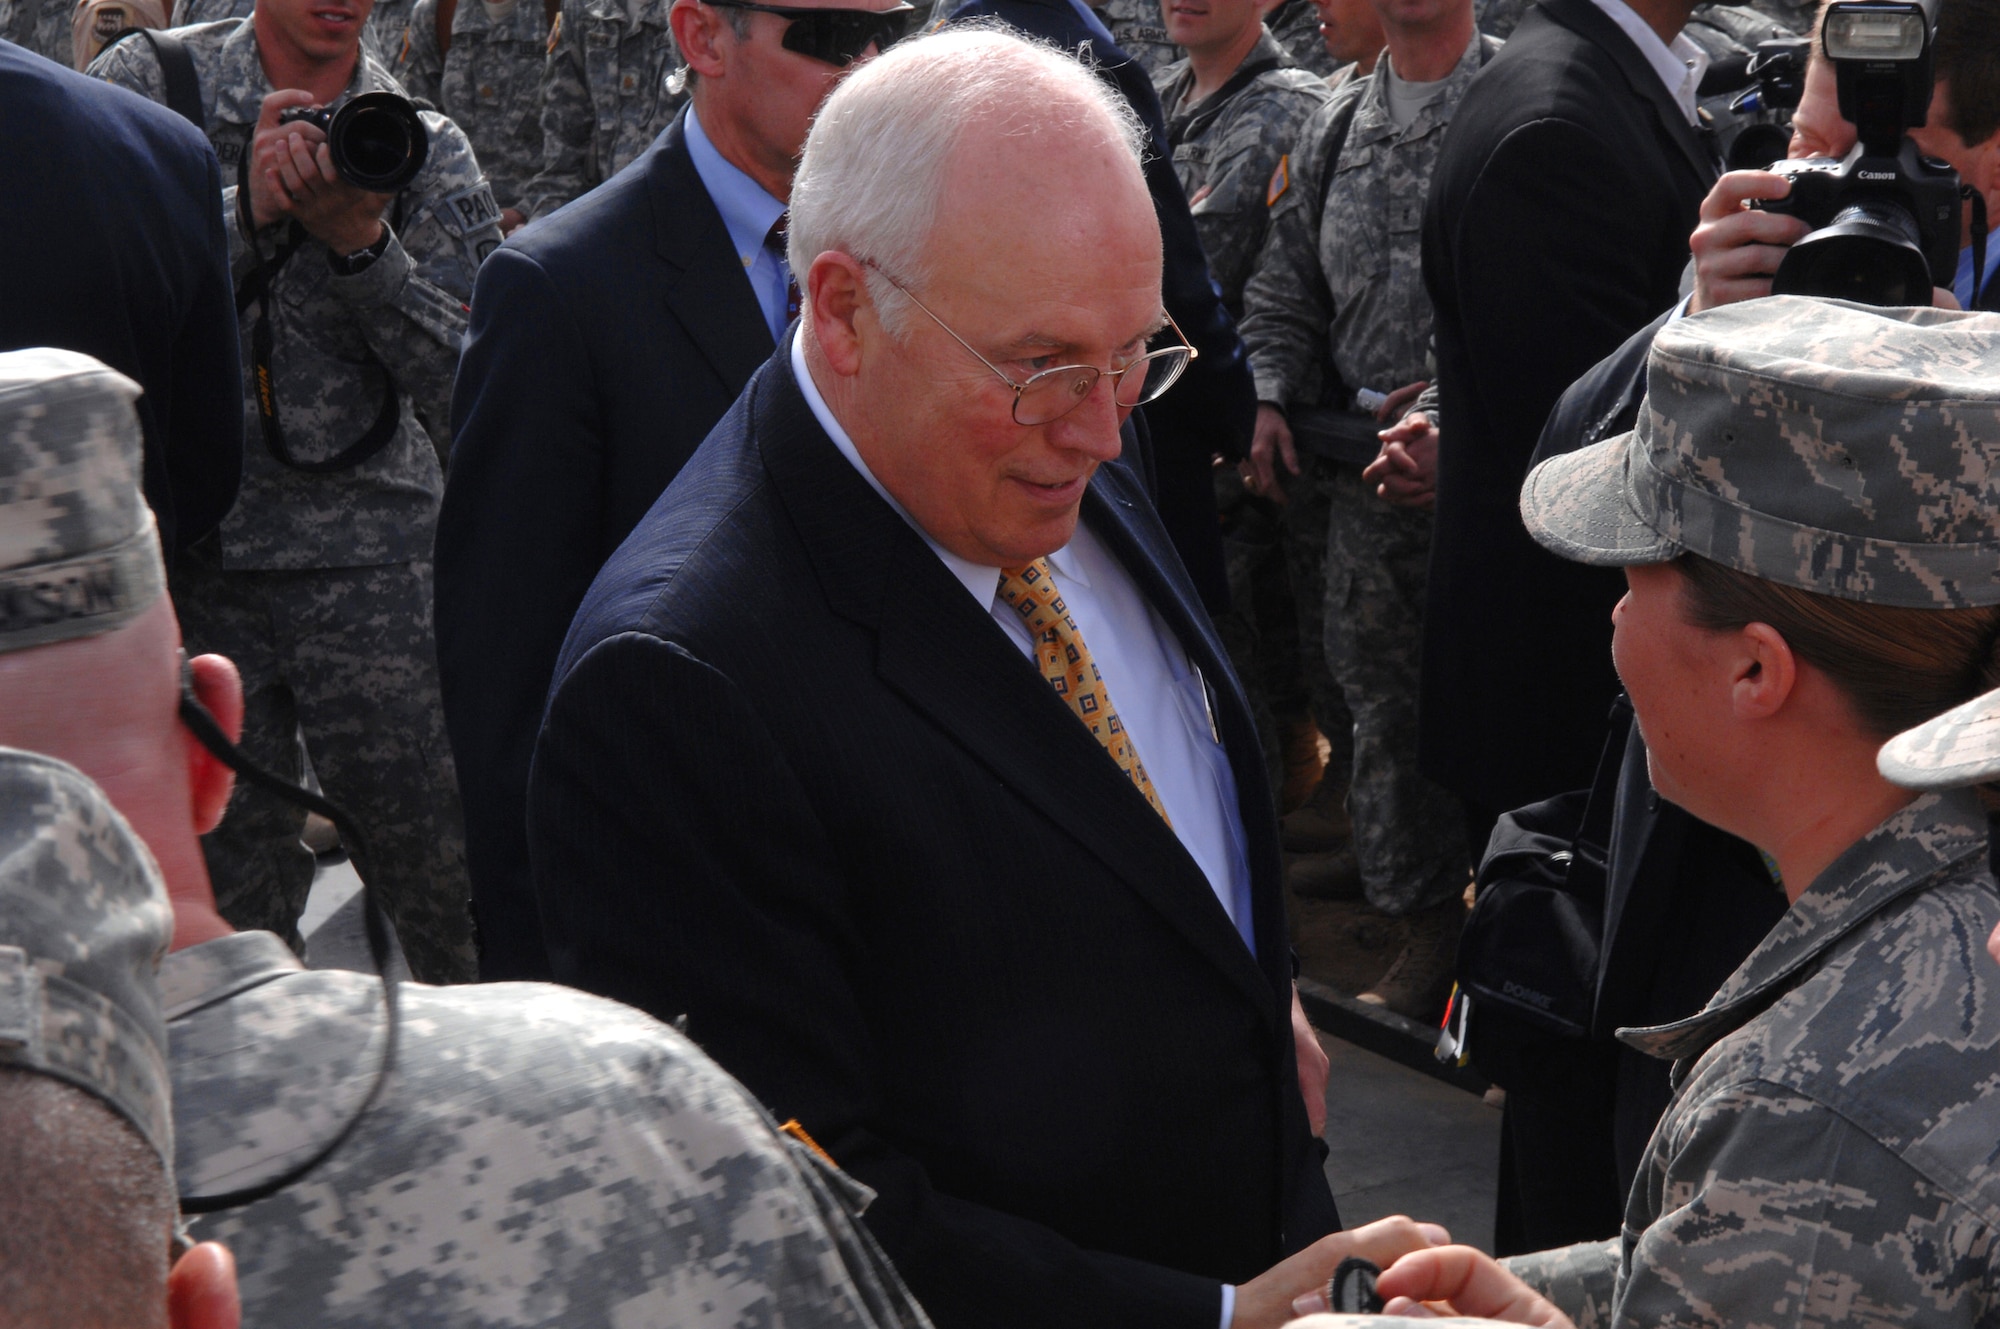 Vice President Dick Cheney shakes hands with servicemembers after a speech March 18 at Balad Air Base, Iraq. The vice president came to the base to visit deployed military men and women serving in support of Operation Iraqi Freedom. (U.S. Air Force photo/Senior Airman Julianne Showalter) 
